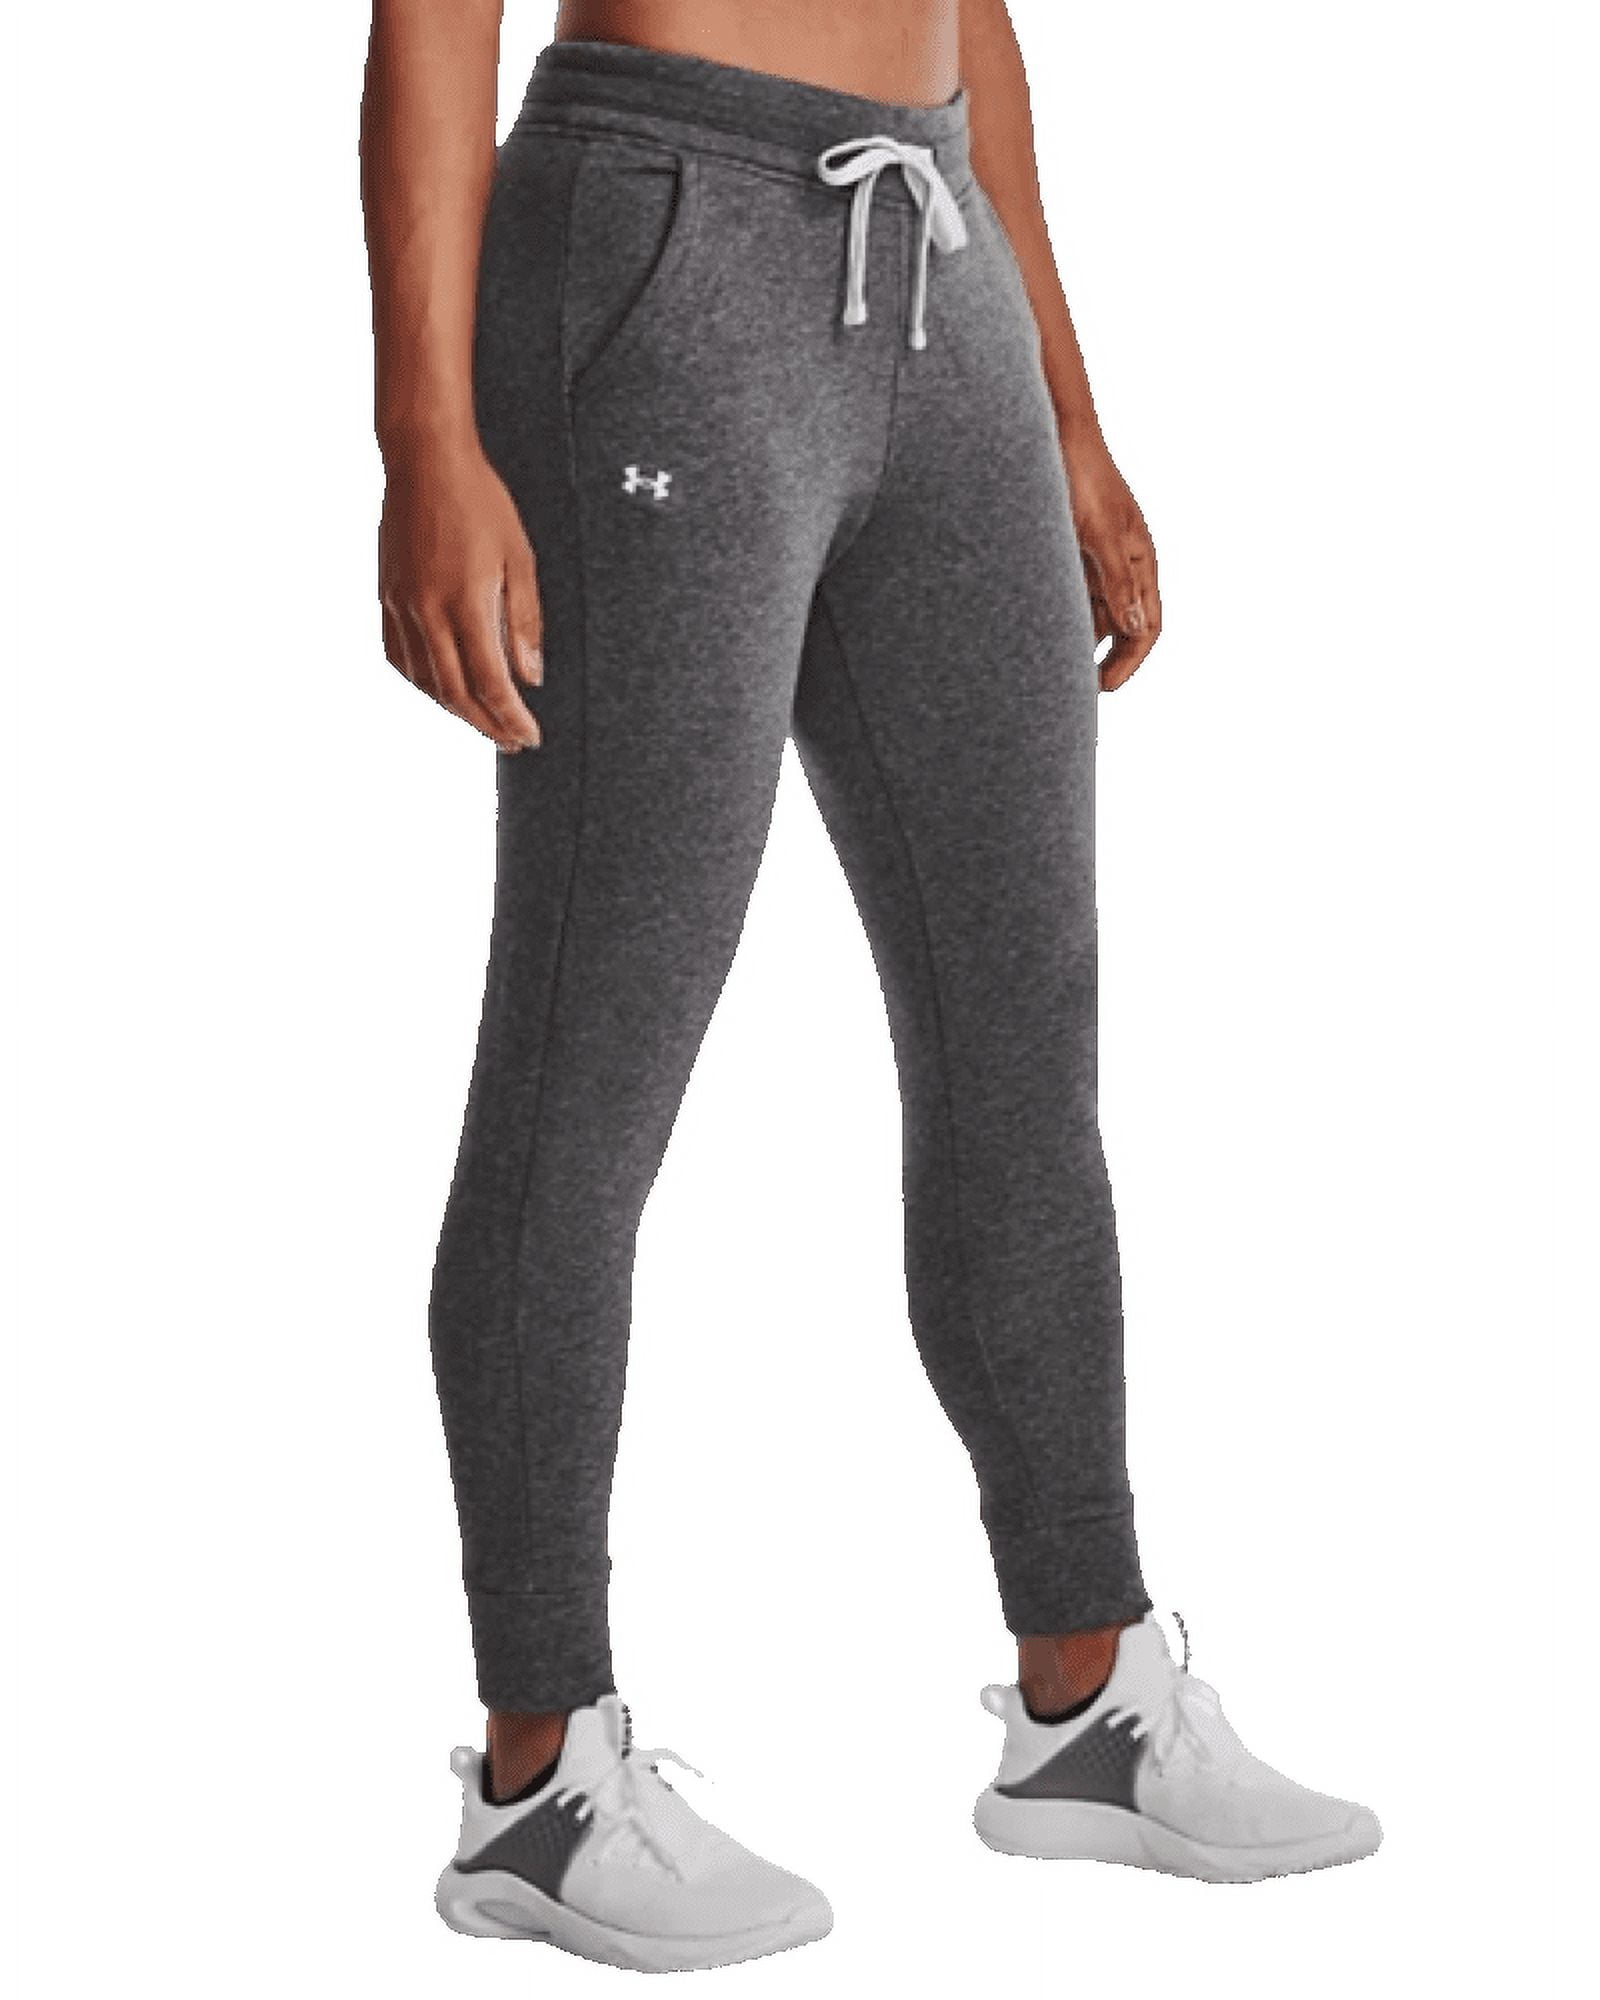 Under Armour Women's Rival Fleece Tapered Joggers Sweatpants S 1366958-019  